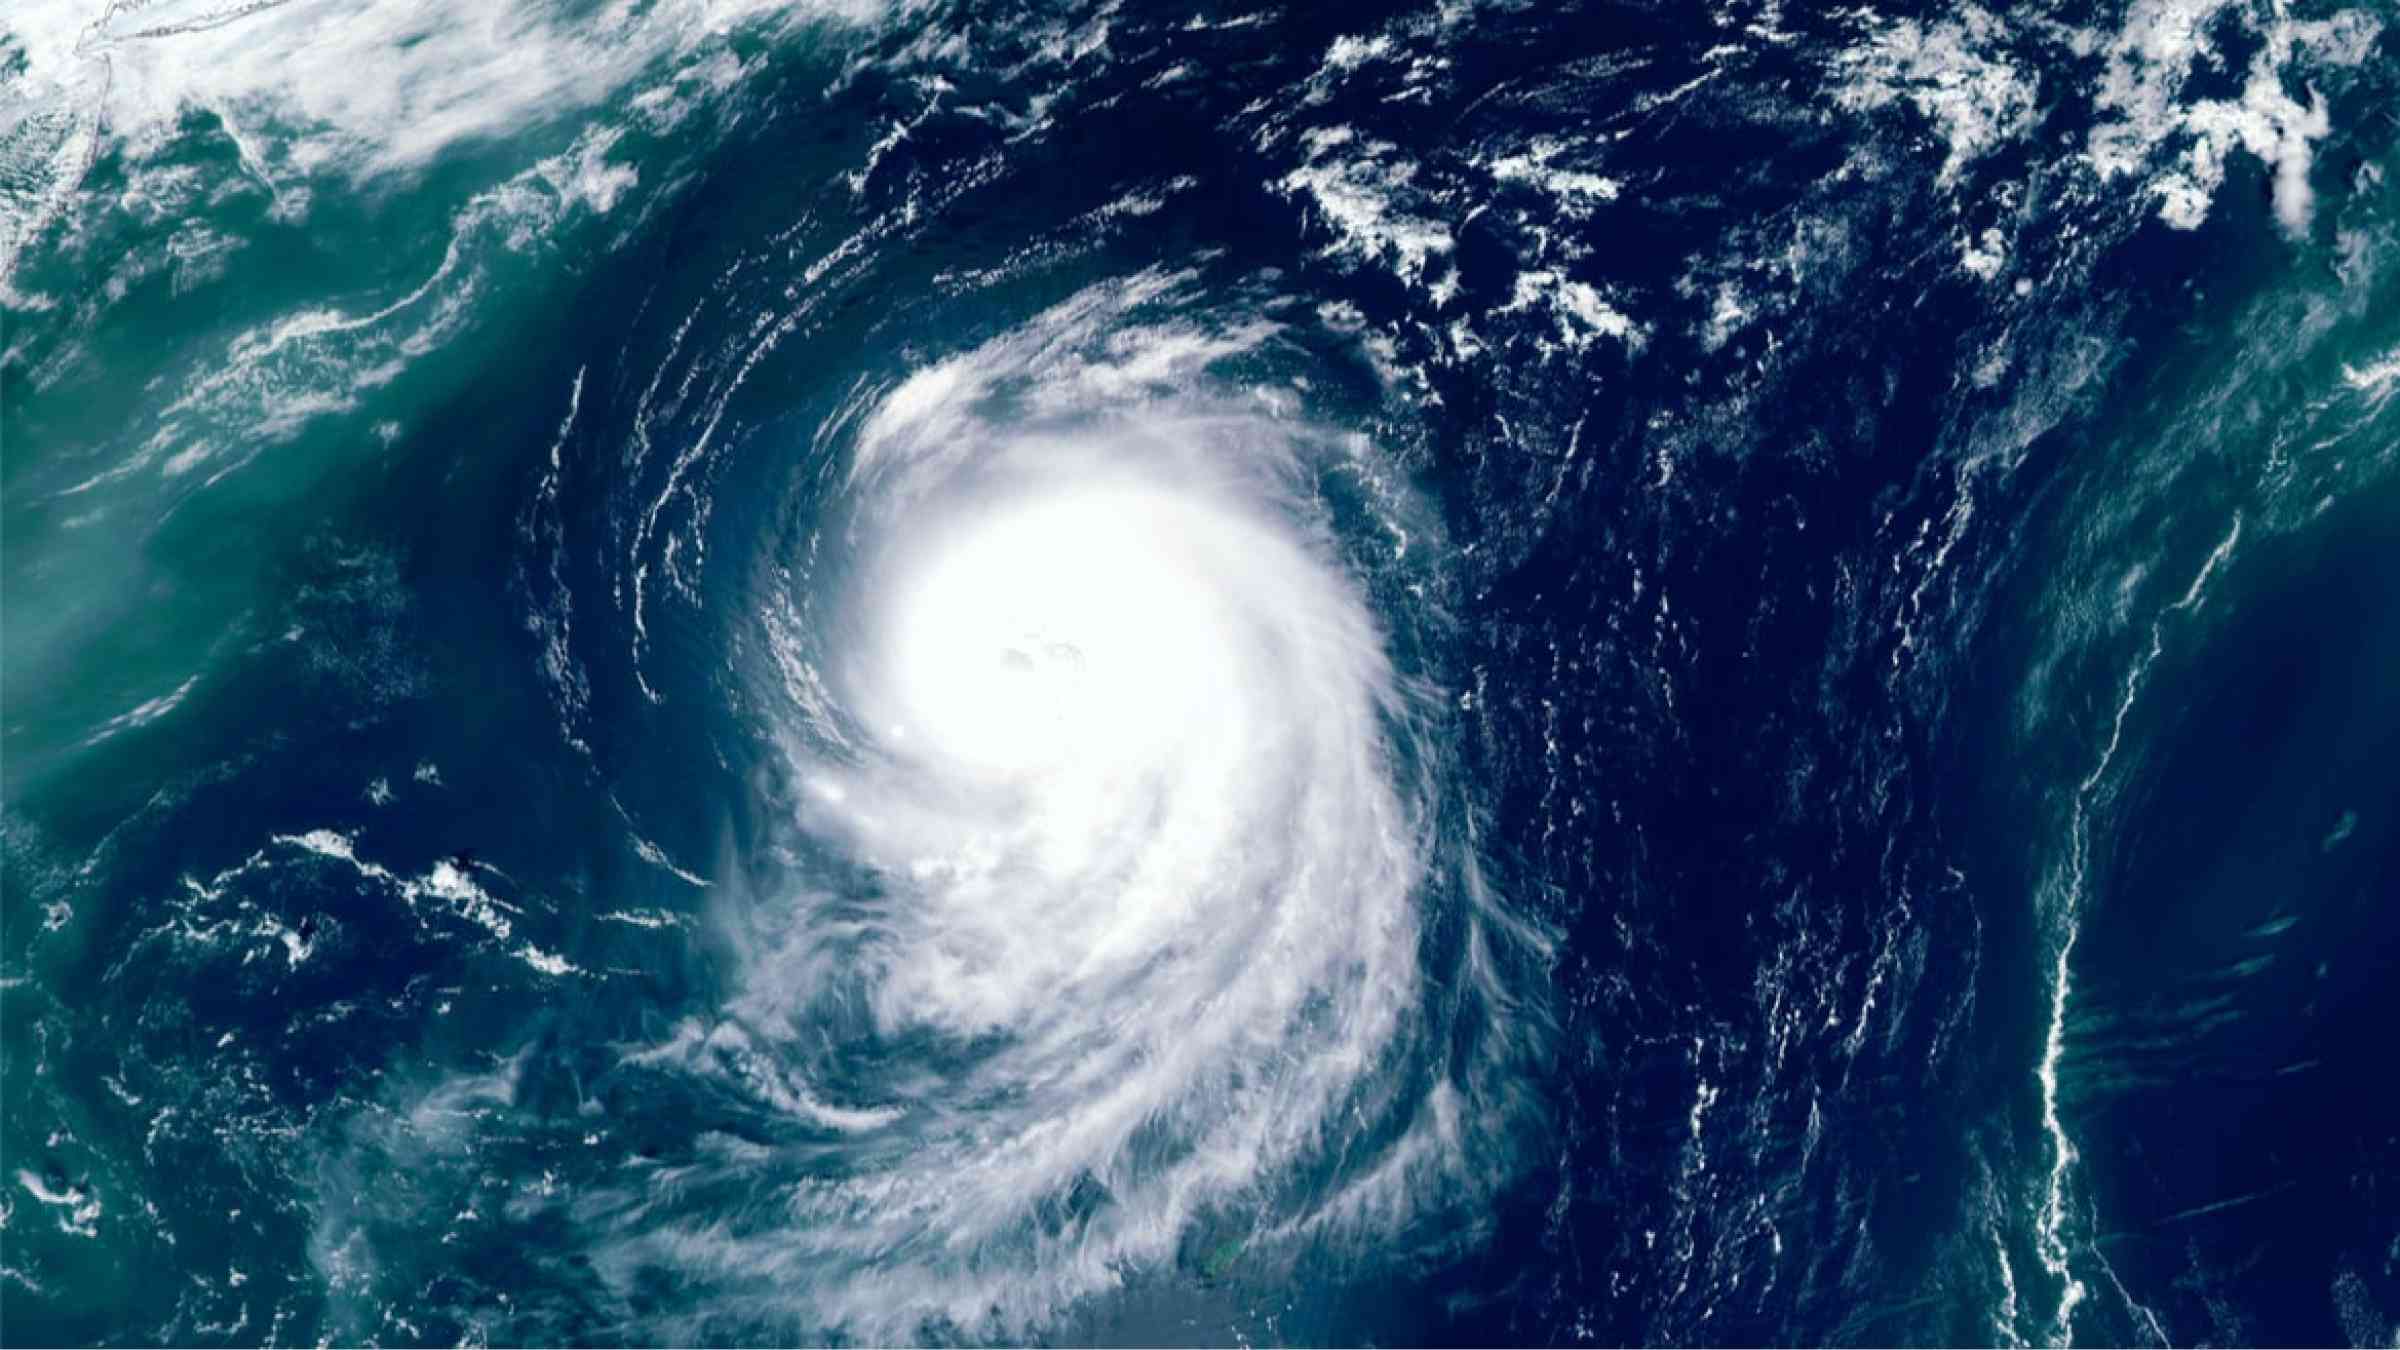 Space view of a hurricane over the ocean